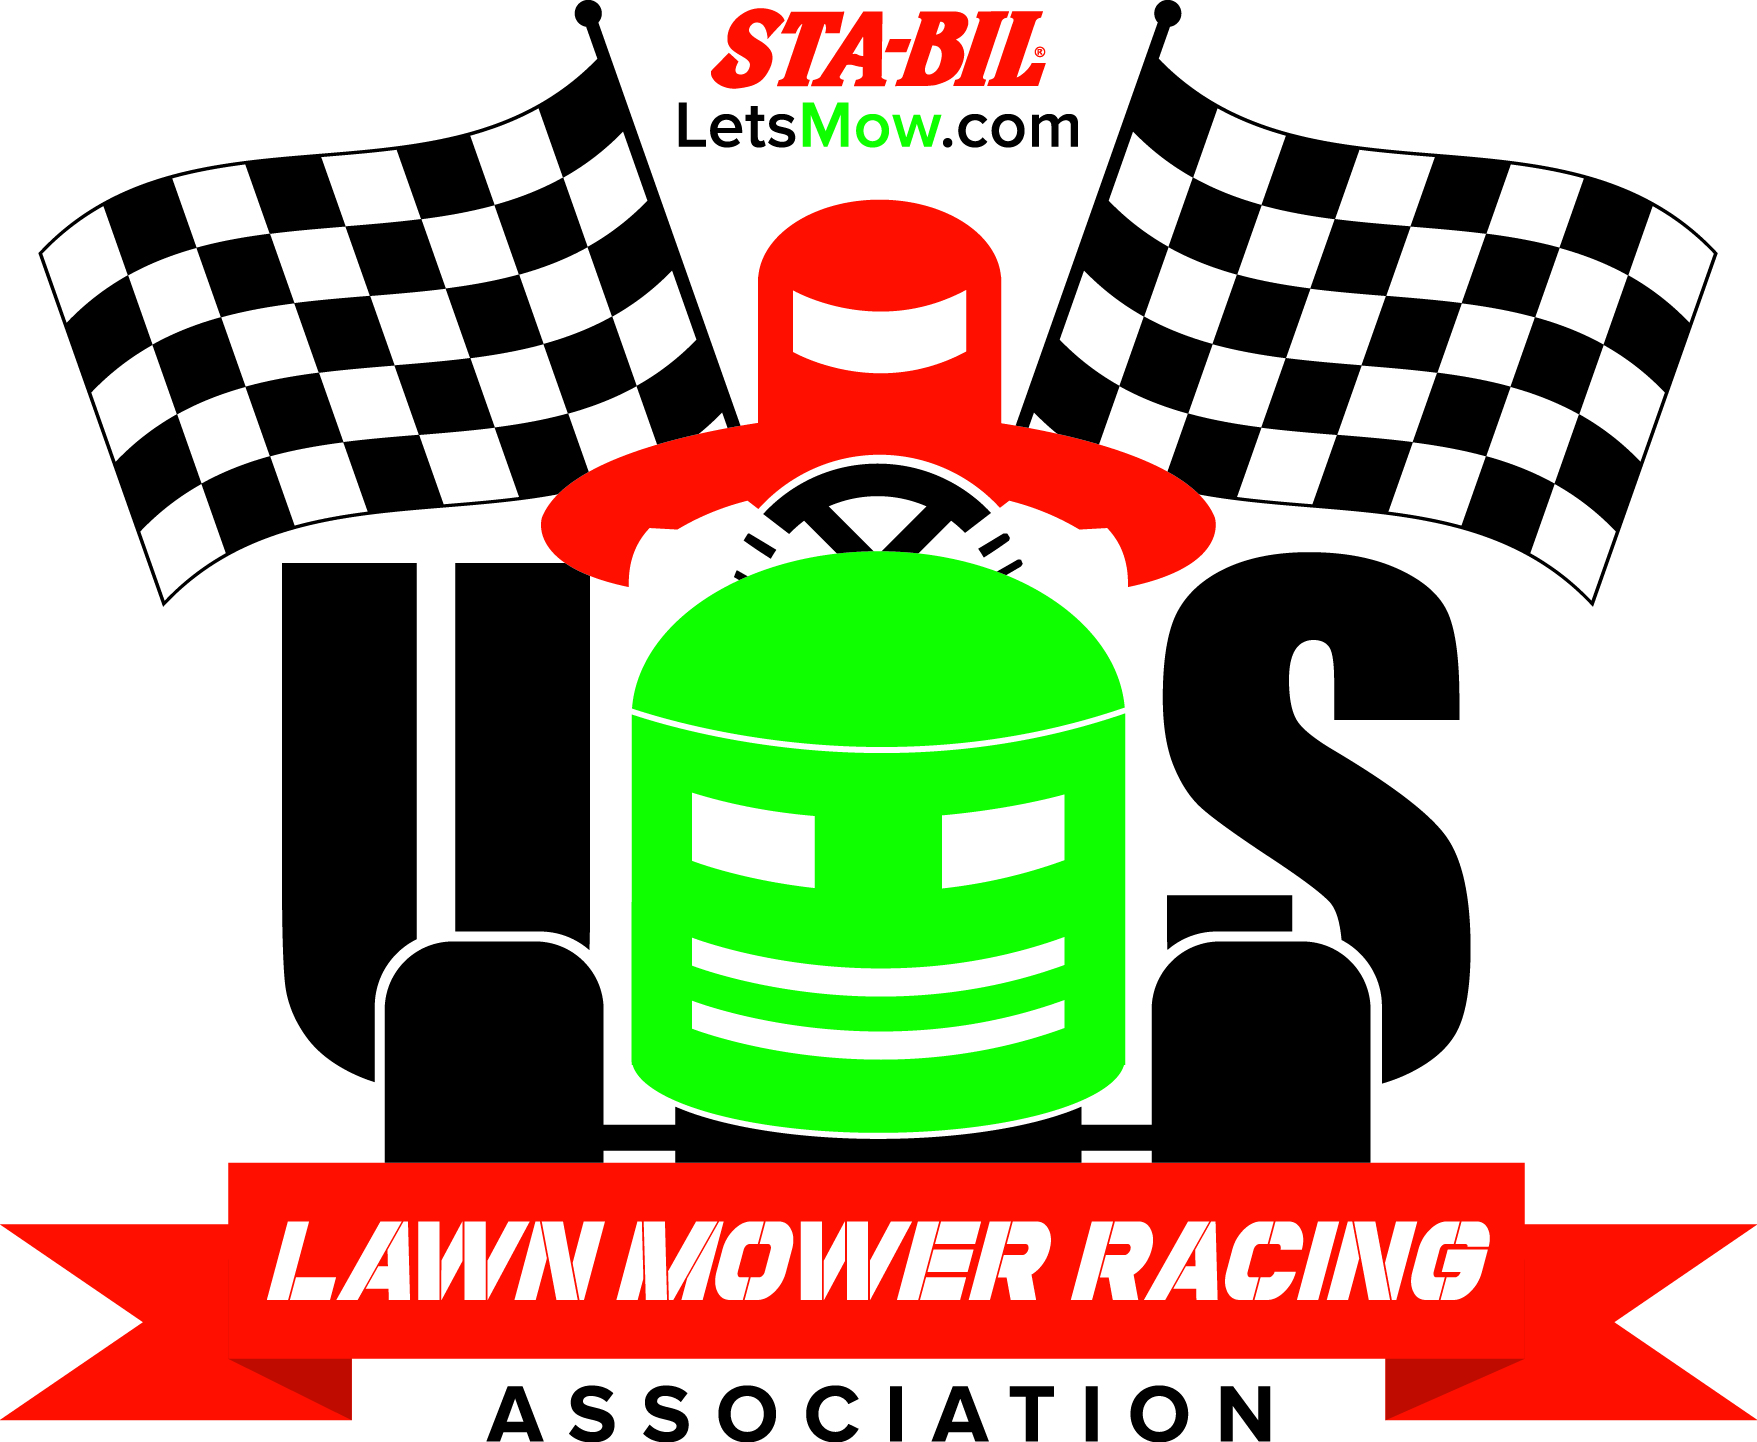 The U.S. Lawn Mower Racing Association was founded in 1992